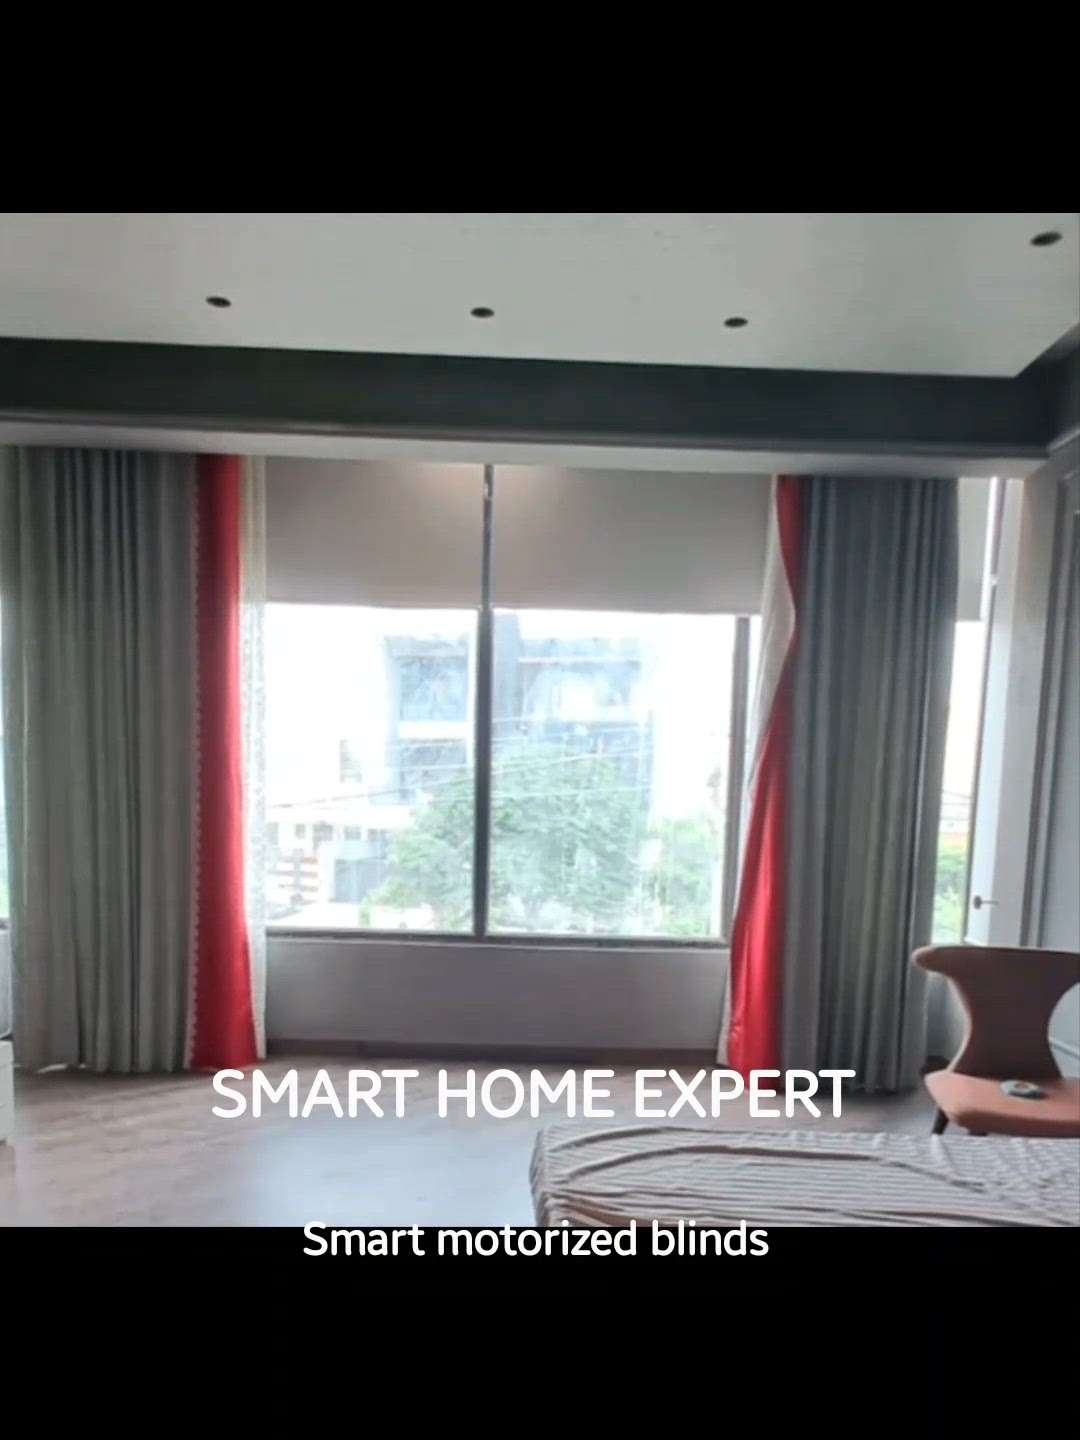 smart blinds 
motorized blinds control with remote, mobile app nfc feature voice command and manually switch button